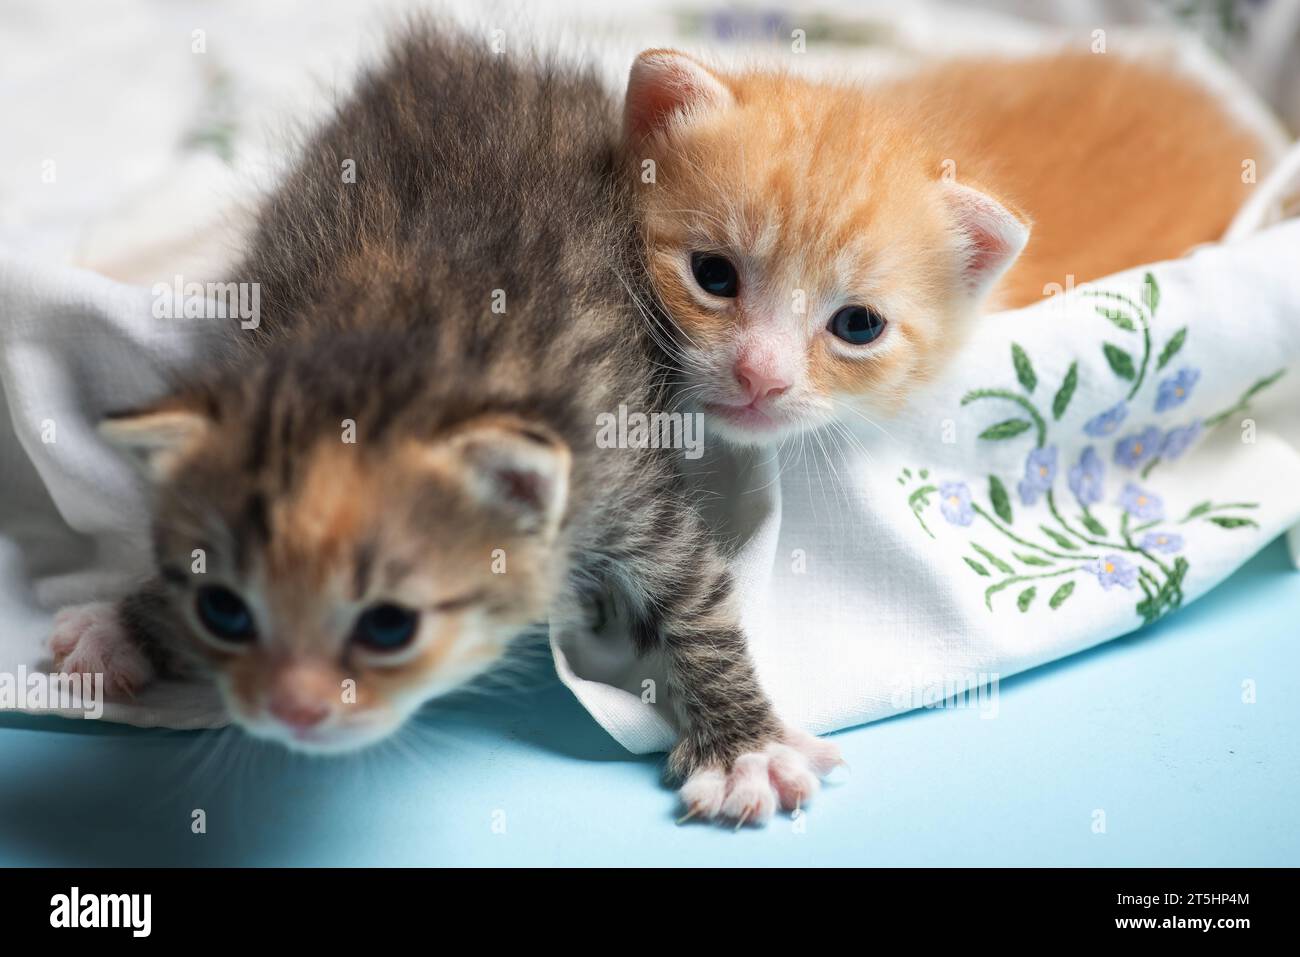 Two adorable newborn colorful kittens take their first clumsy steps in a basket Stock Photo